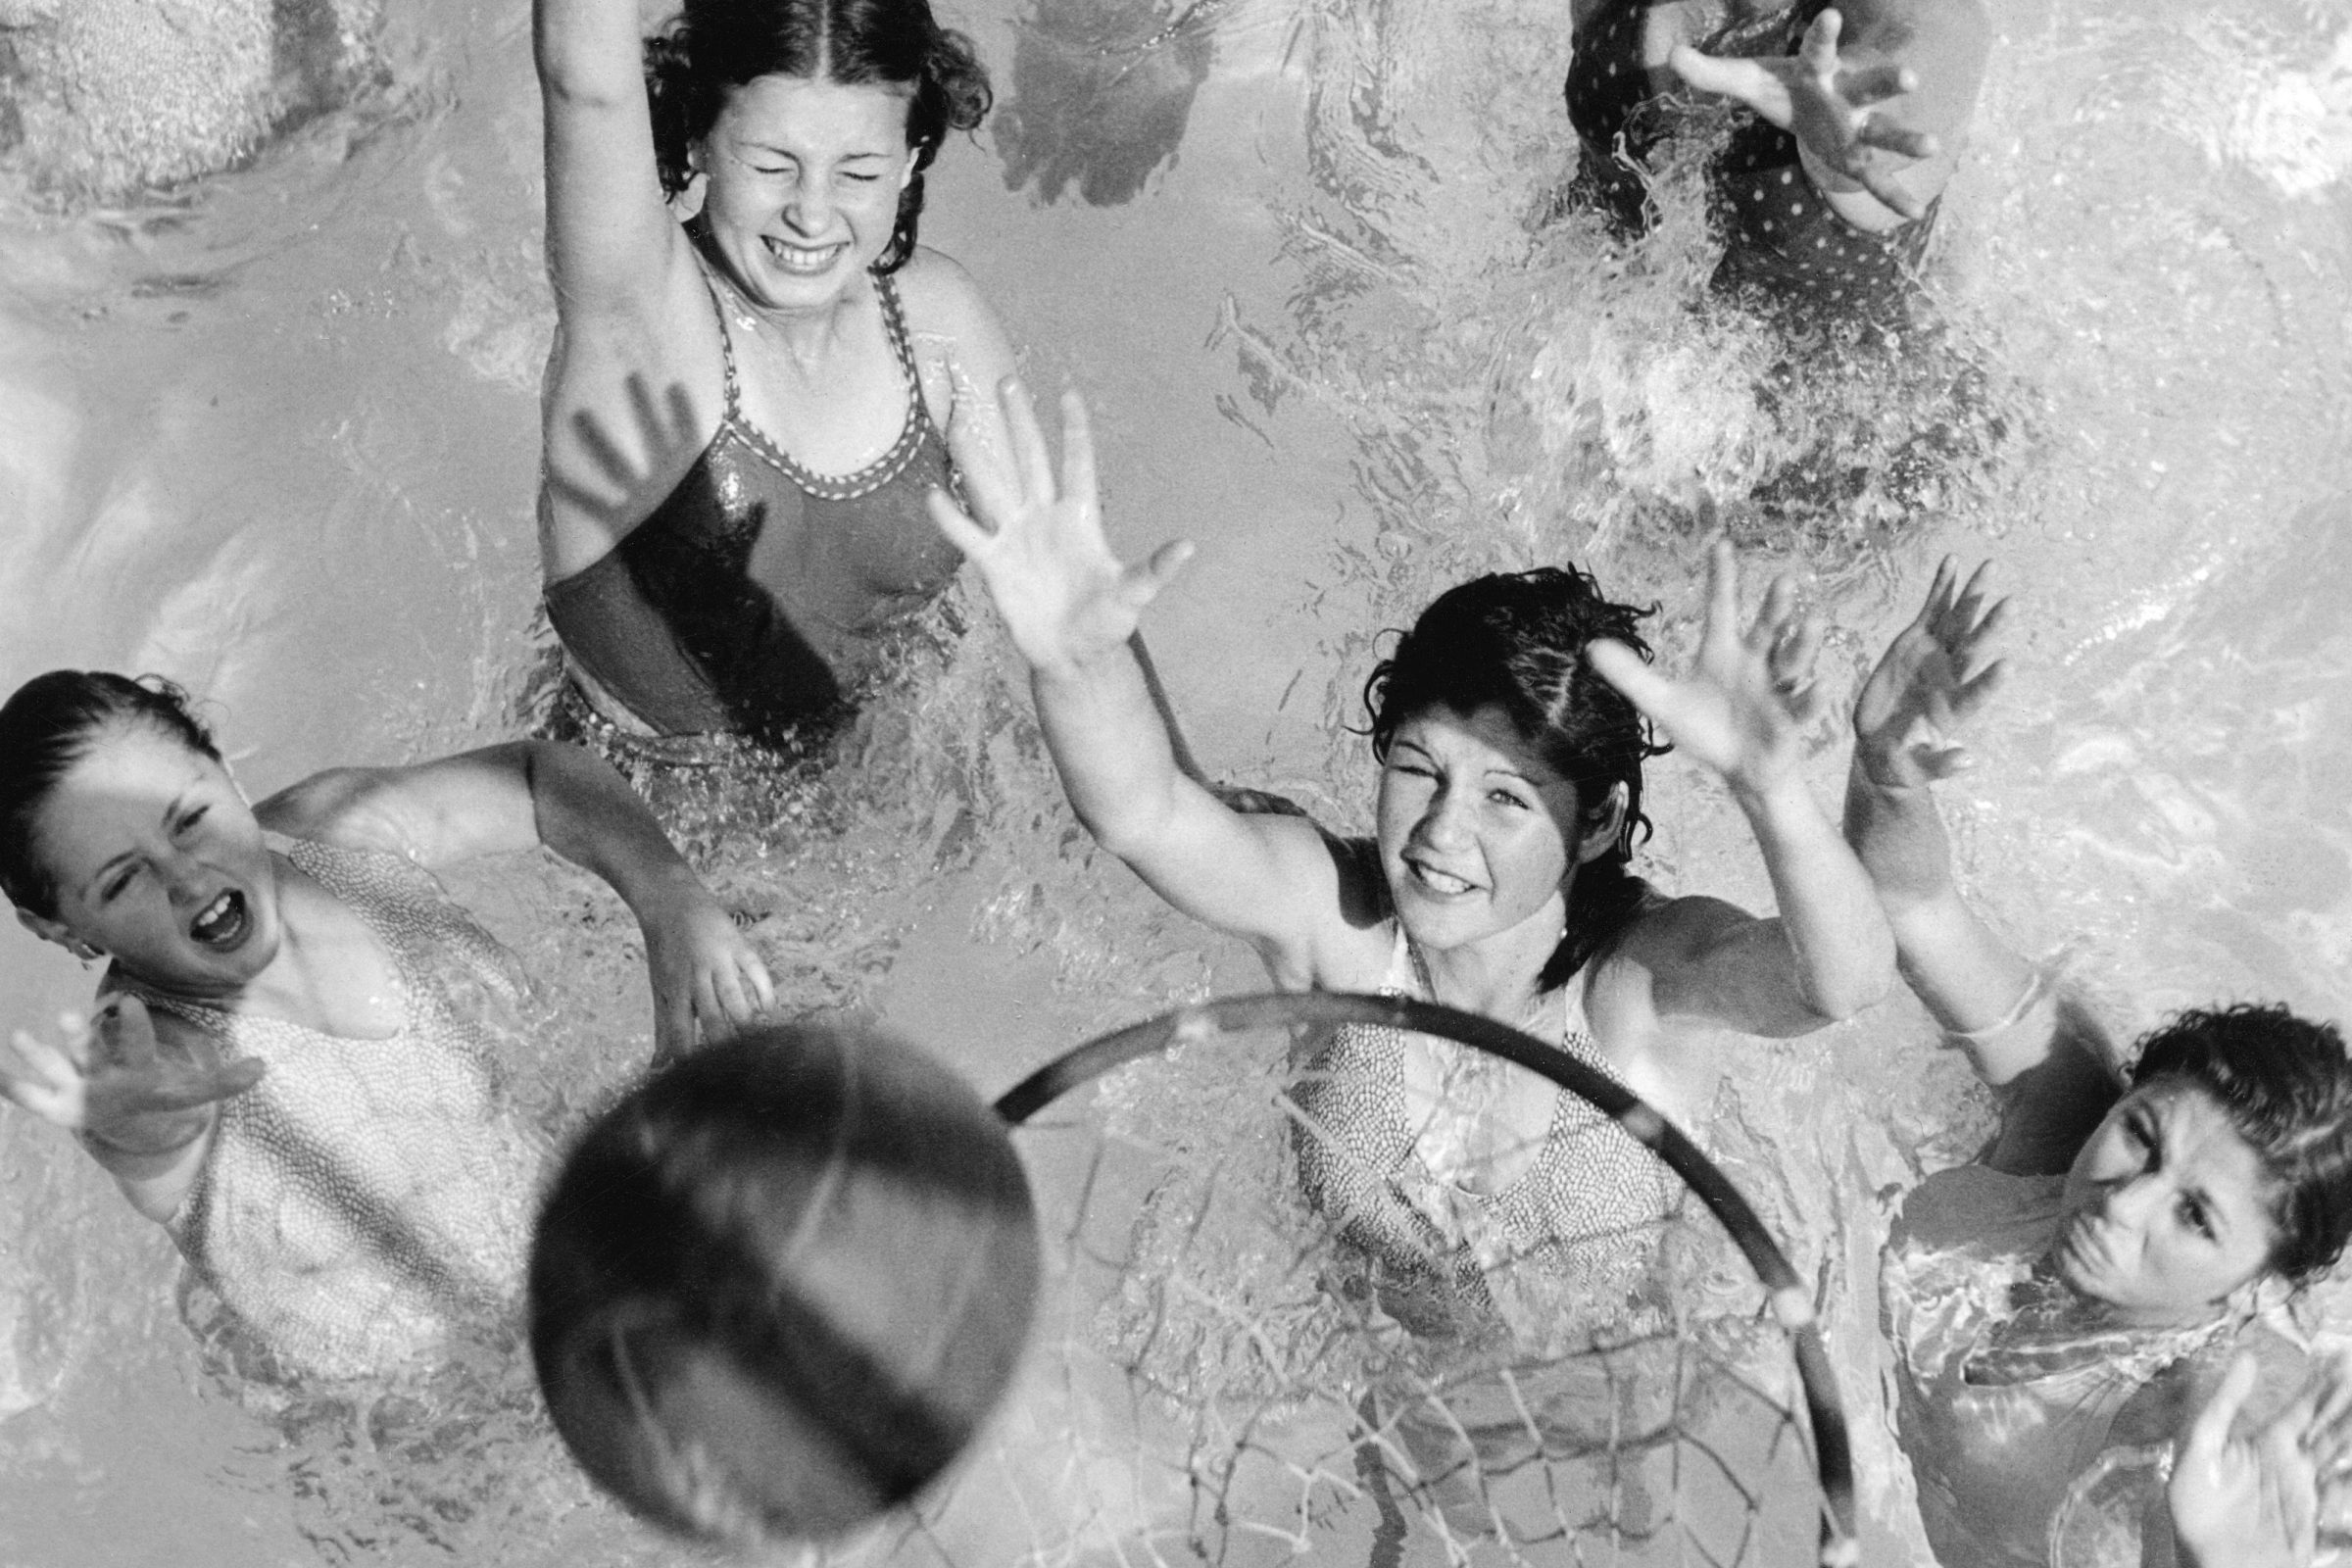 Young girls play basketball in a swimming pool in a 1930s photo